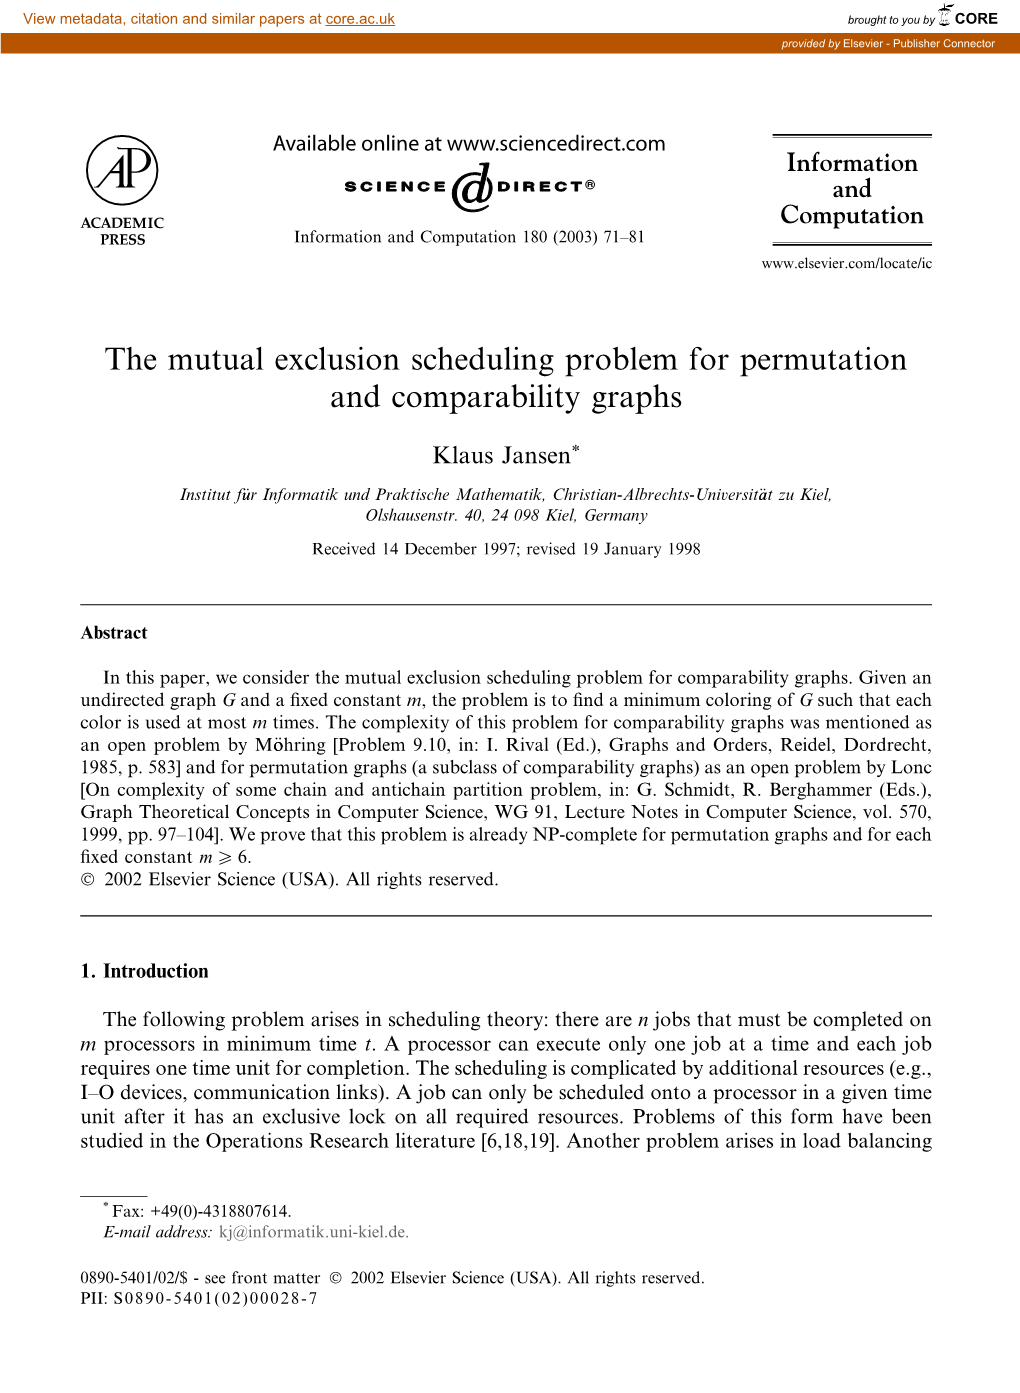 The Mutual Exclusion Scheduling Problem for Permutation and Comparability Graphs